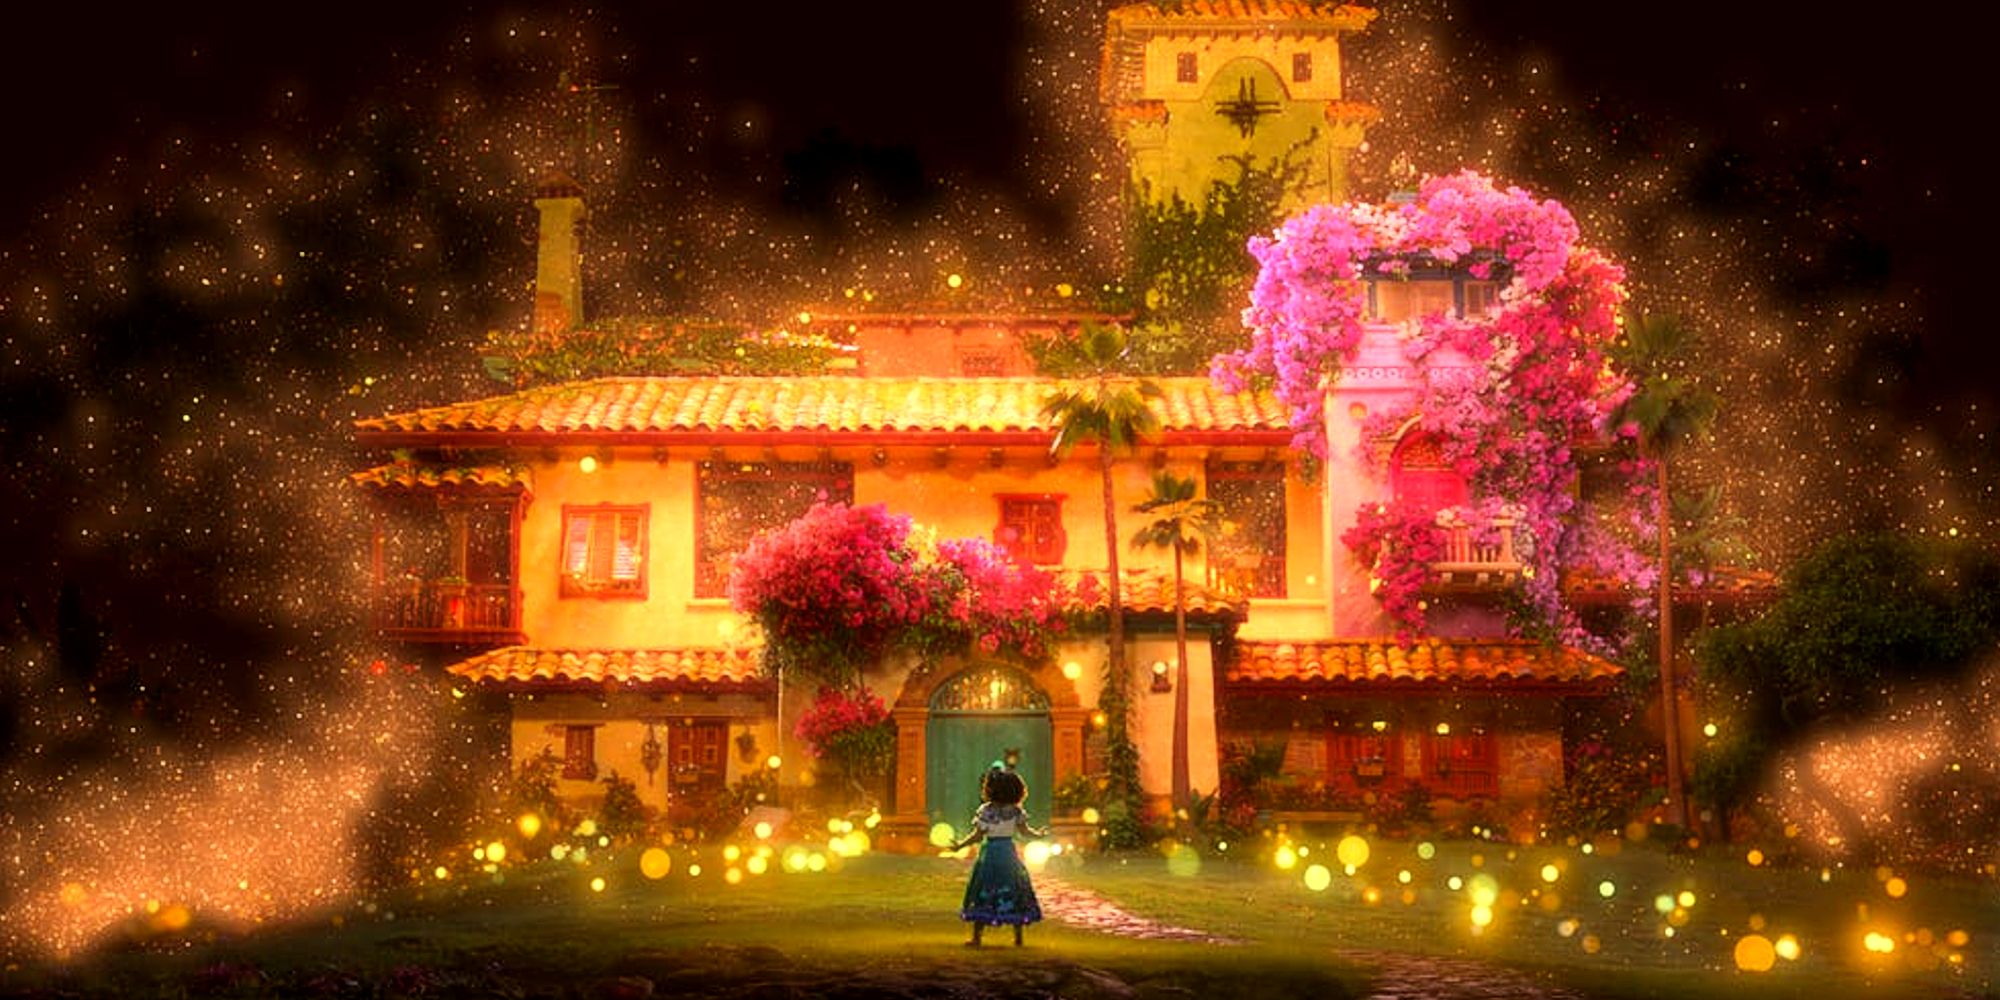 Mirabel Madrigal looks at the glowing Magical House in Encanto.